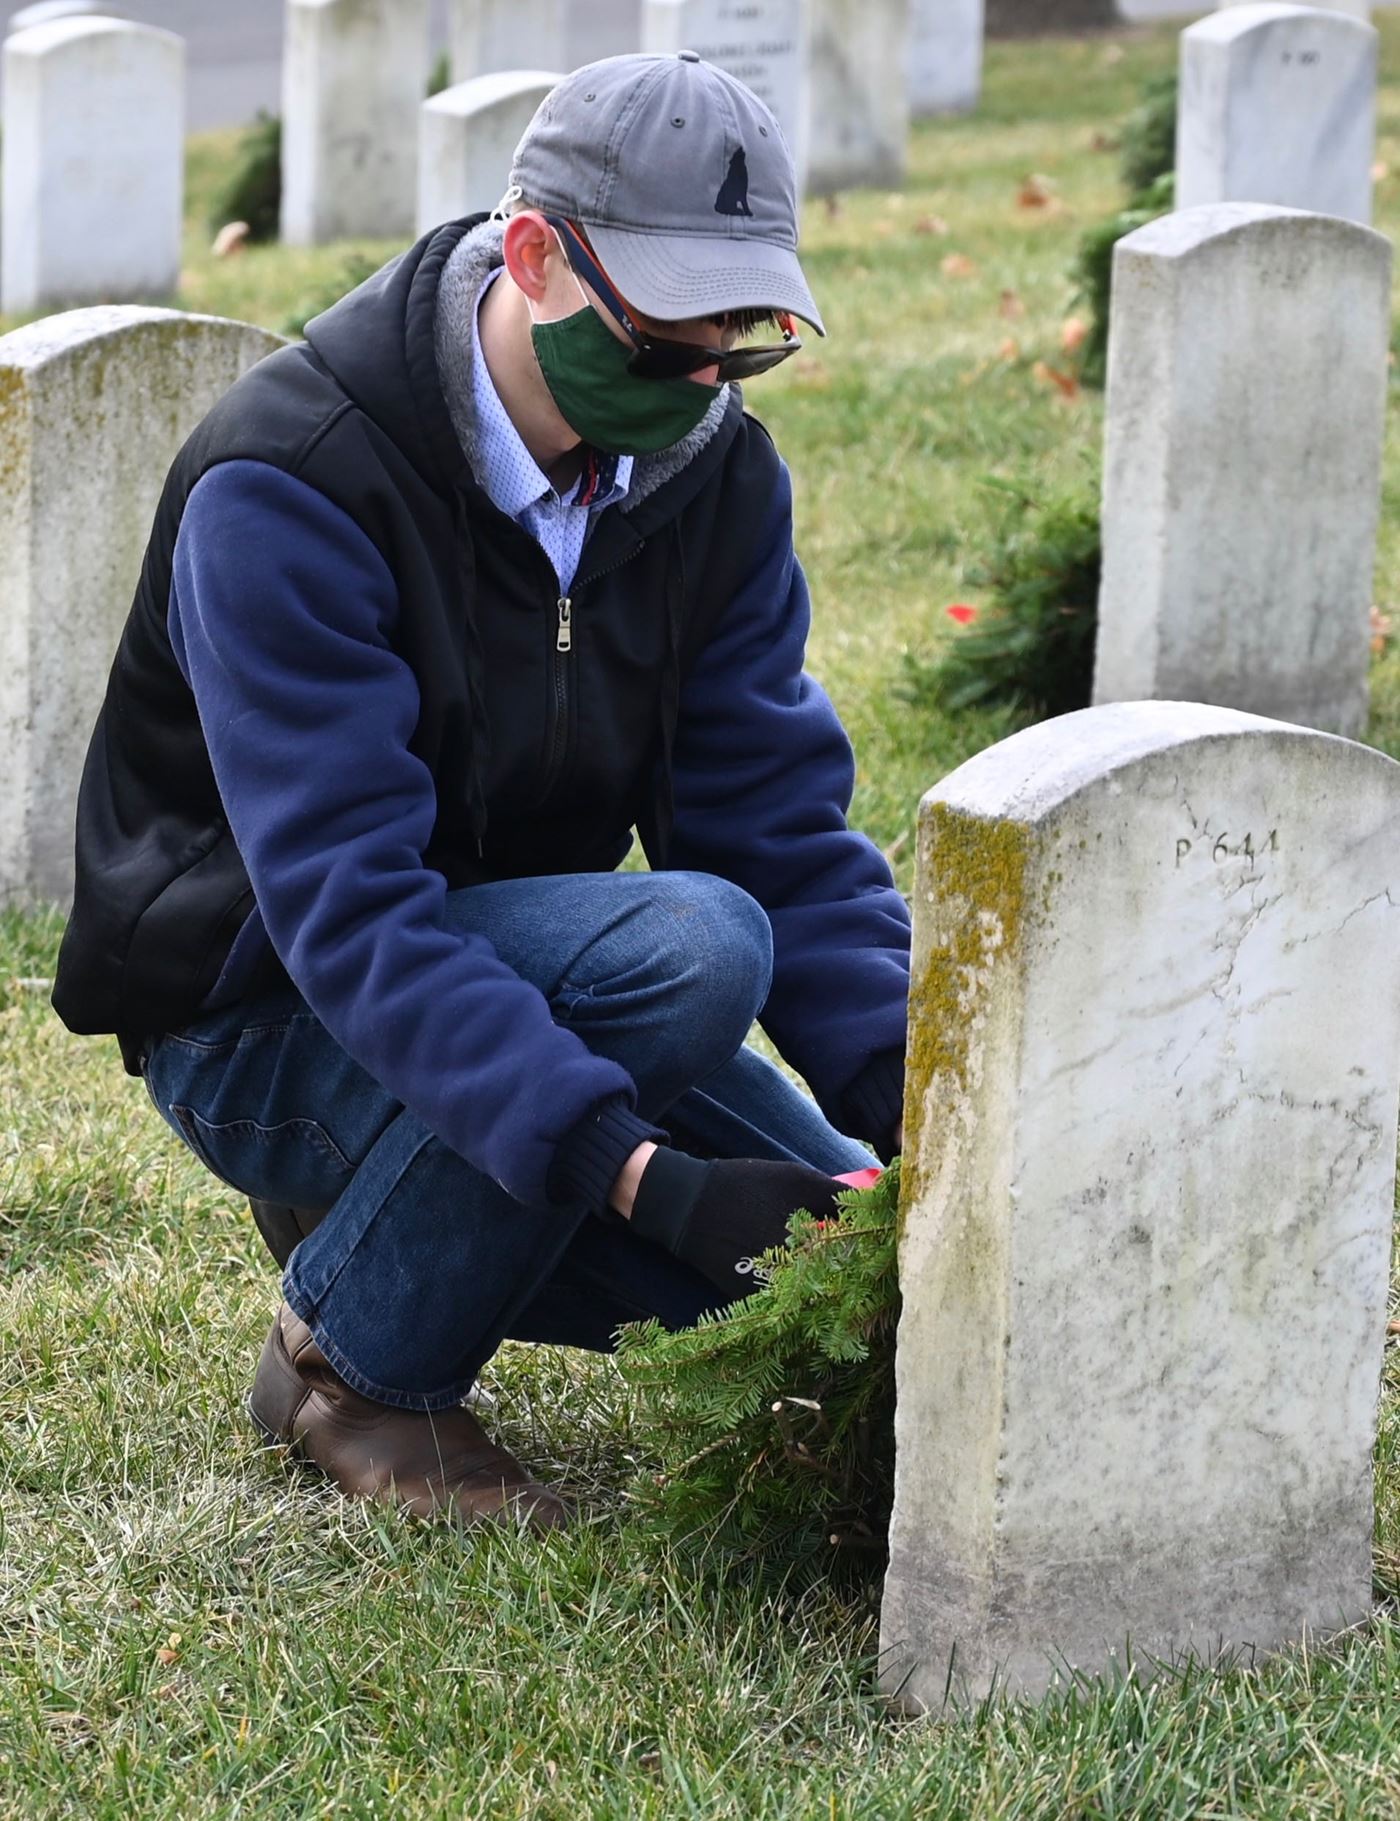 A volunteer works with the CGSC Foundation to lay wreaths at the Fort Leavenworth National Cemetery on Dec. 19, 2020.